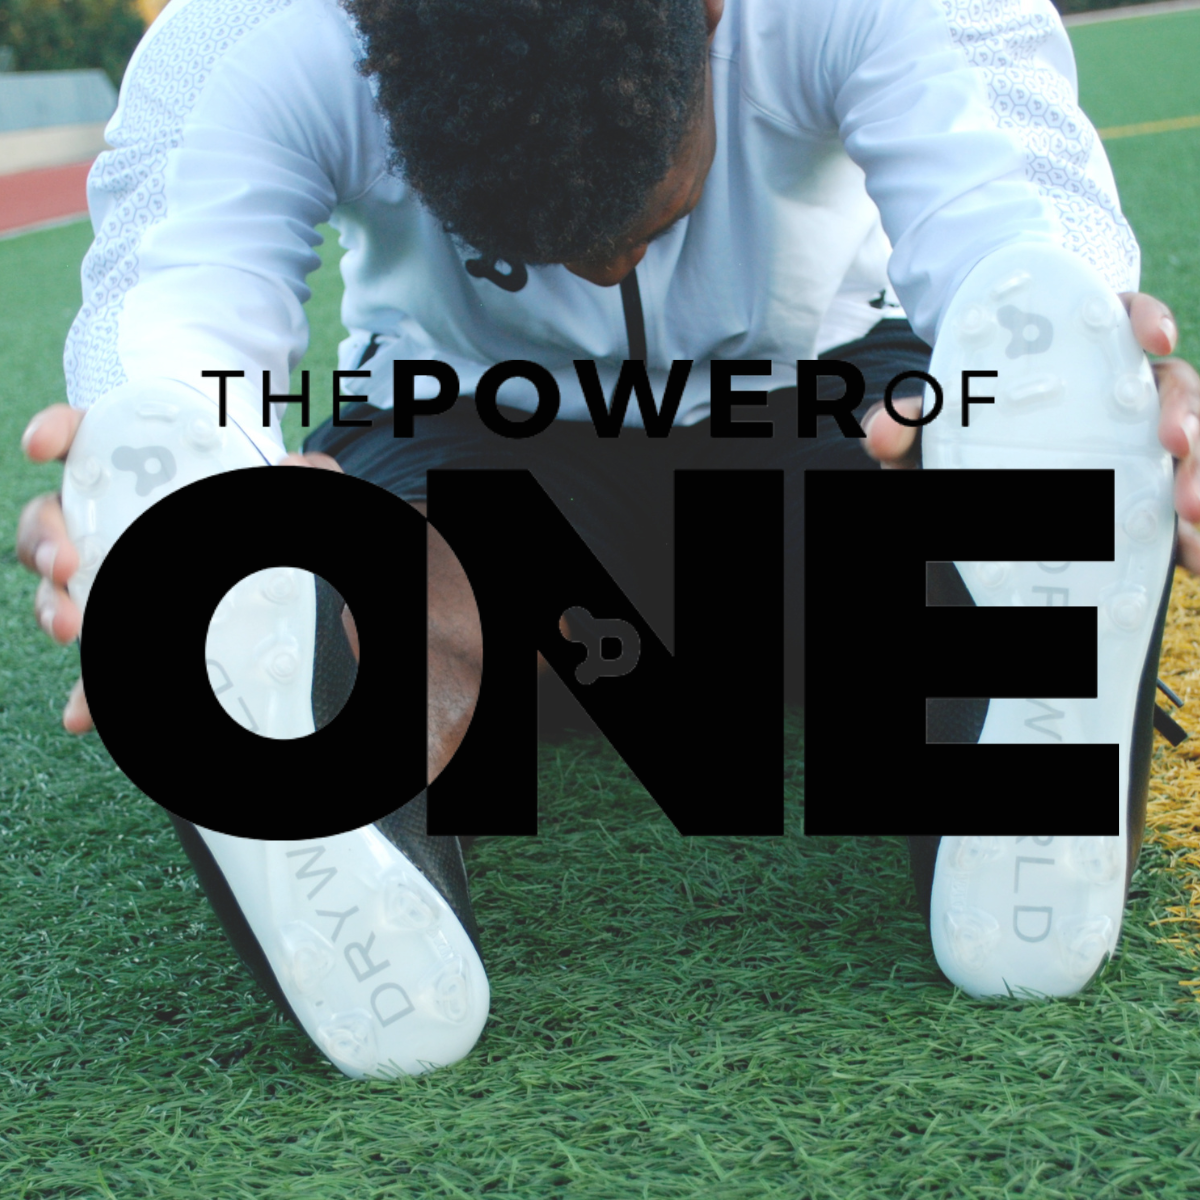 Power Of One - The Law of Cooling Down